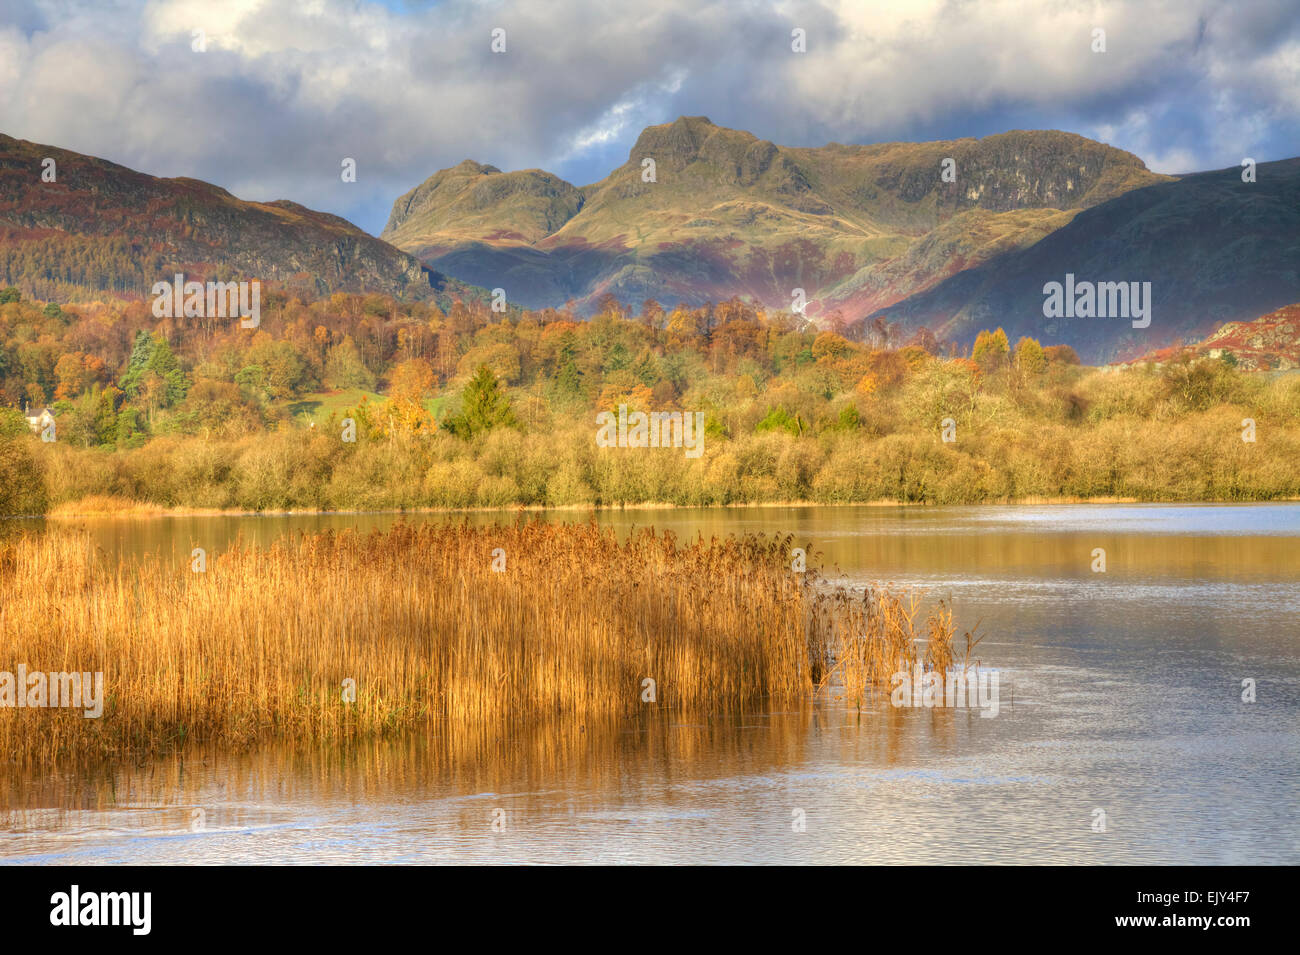 Elterwater with the Langdale Pikes in the distance. Stock Photo